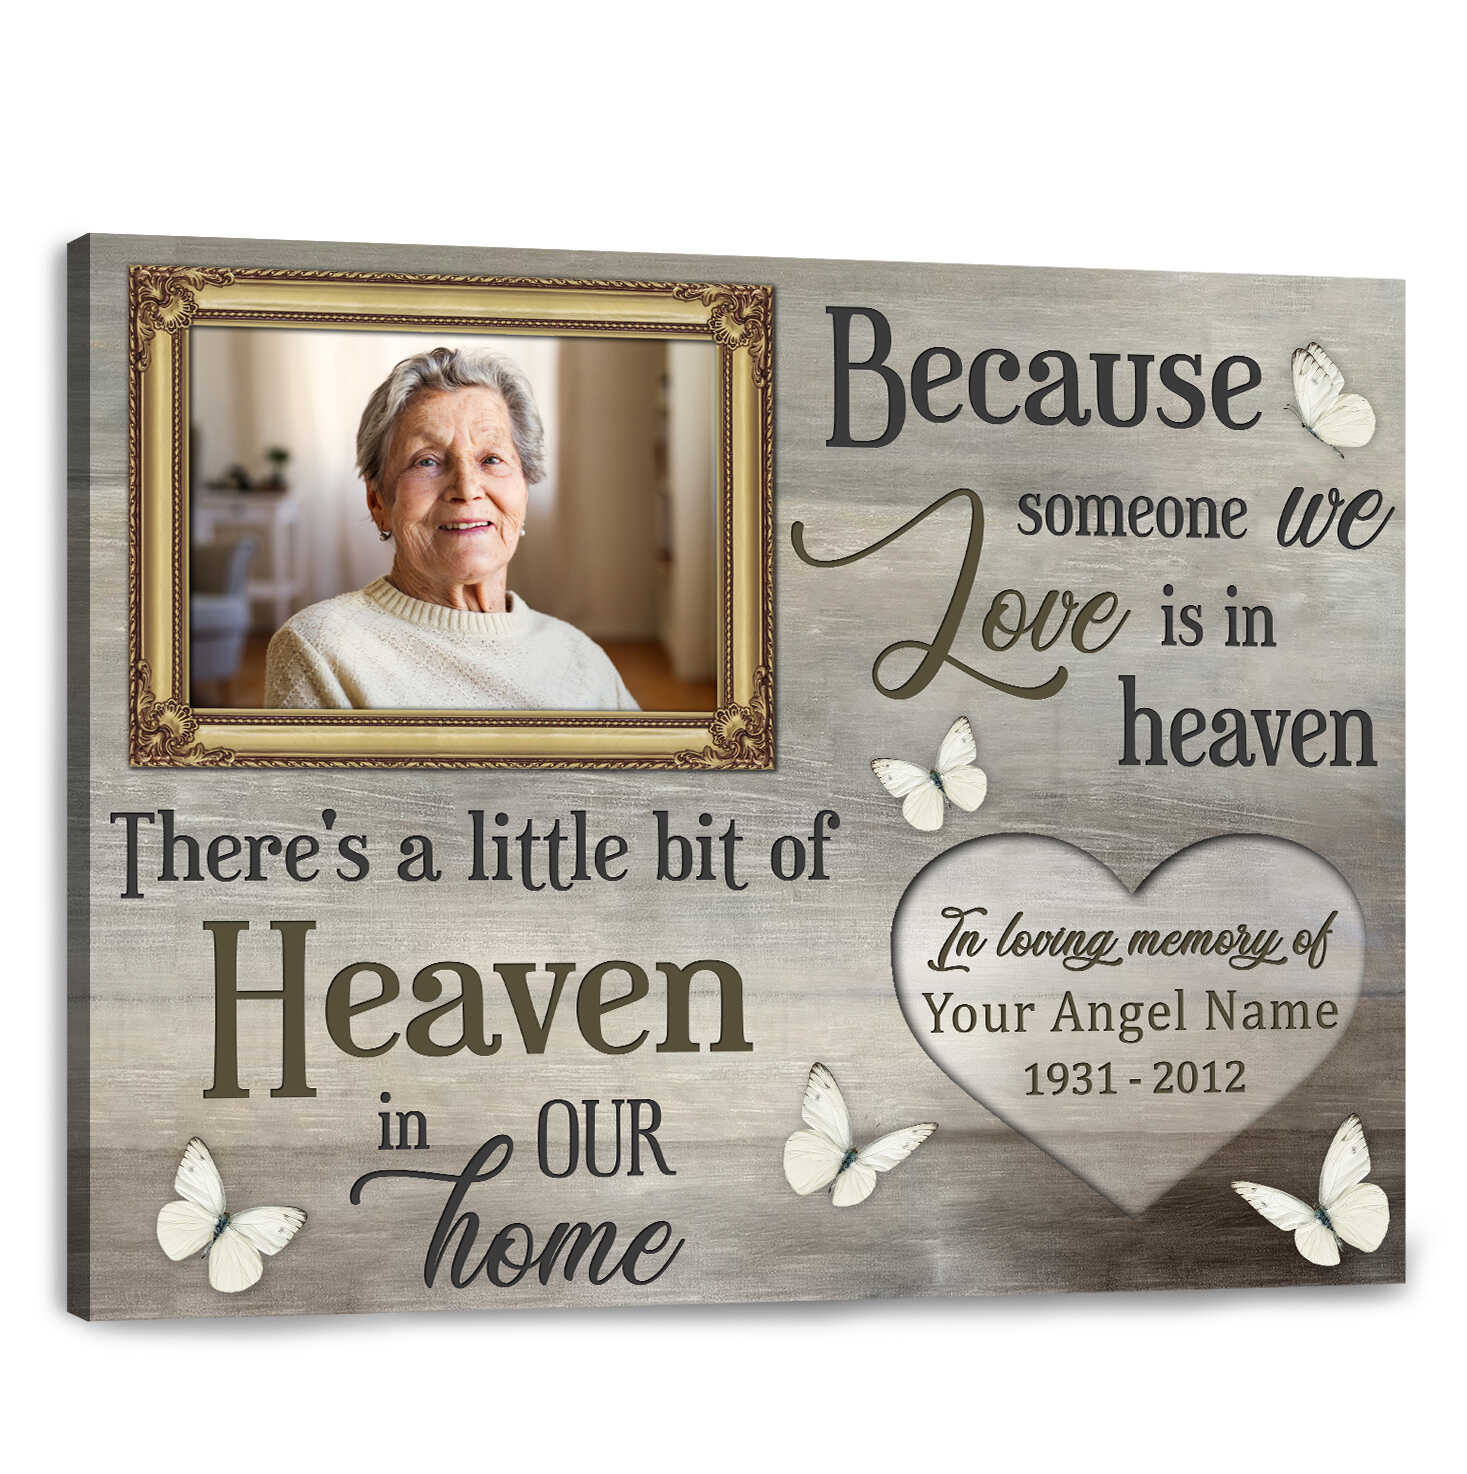 Custom Canvas Prints Personalized Gifts Memorial Photo Gifts Because someone we love is in heaven Butterflies Wall Art Decor Ohcanvas